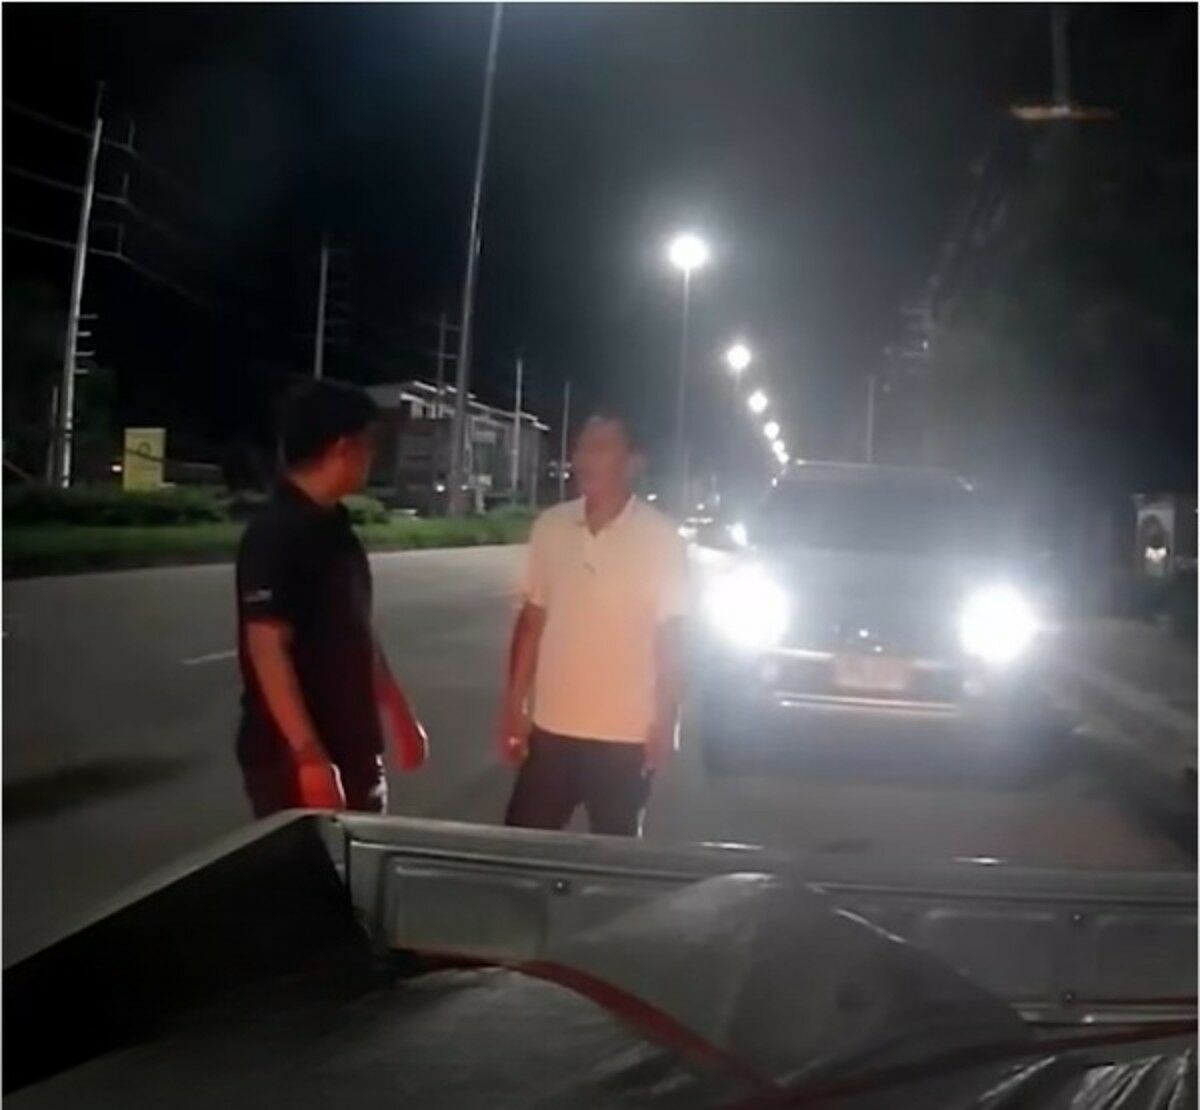 Road rage: Knife-wielding driver threatens man in Chiang Mai (video)